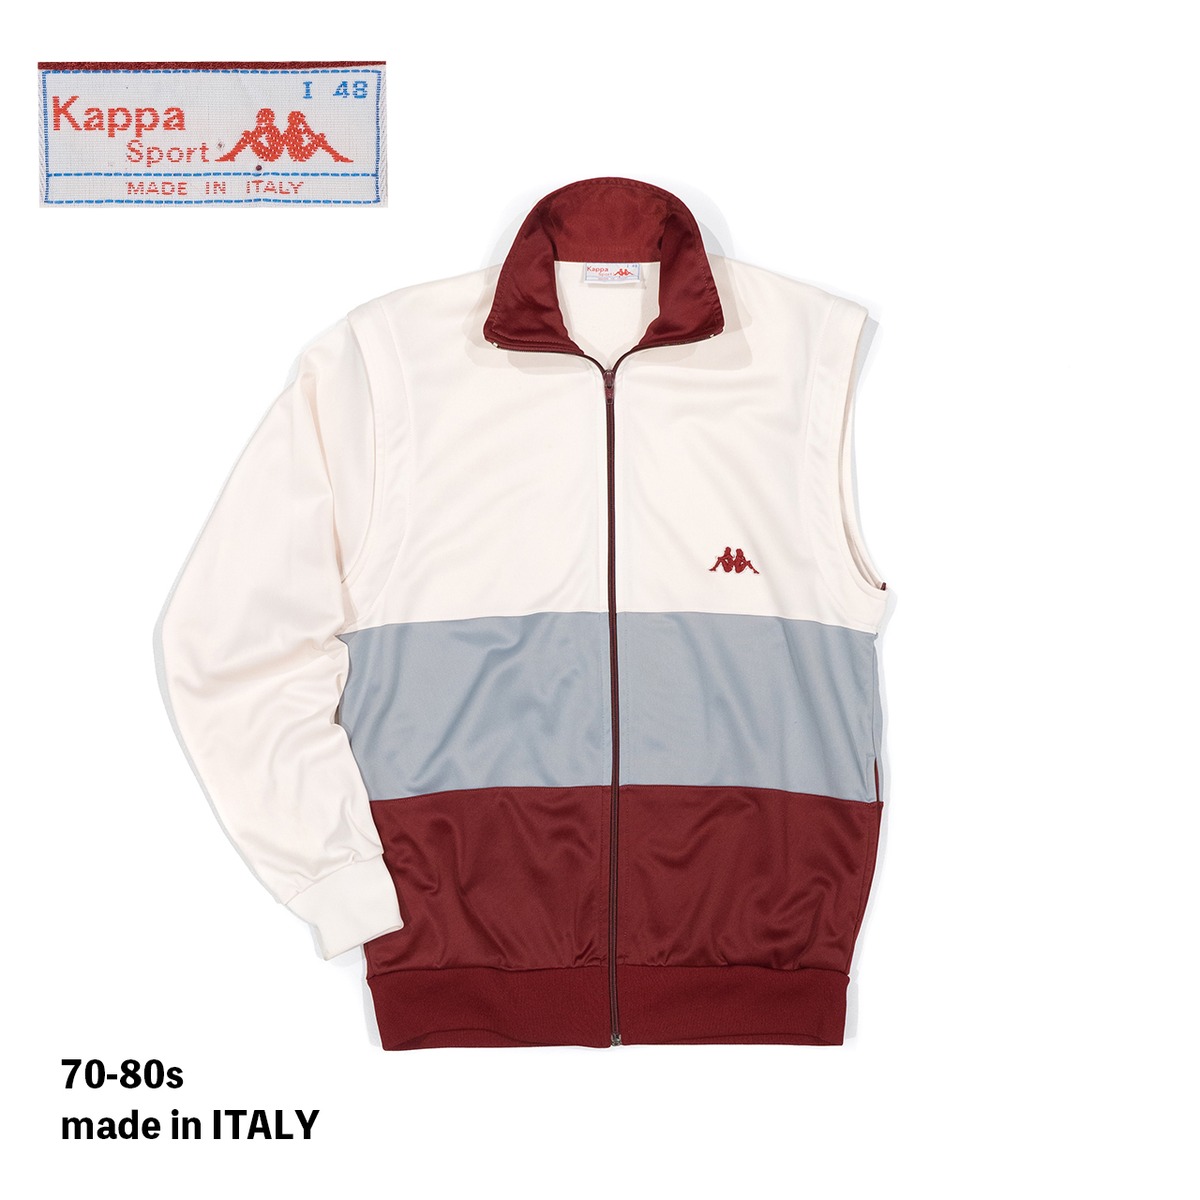 USED 70-80s Kappa Sport Jacket made in ITALY 48 | EFK